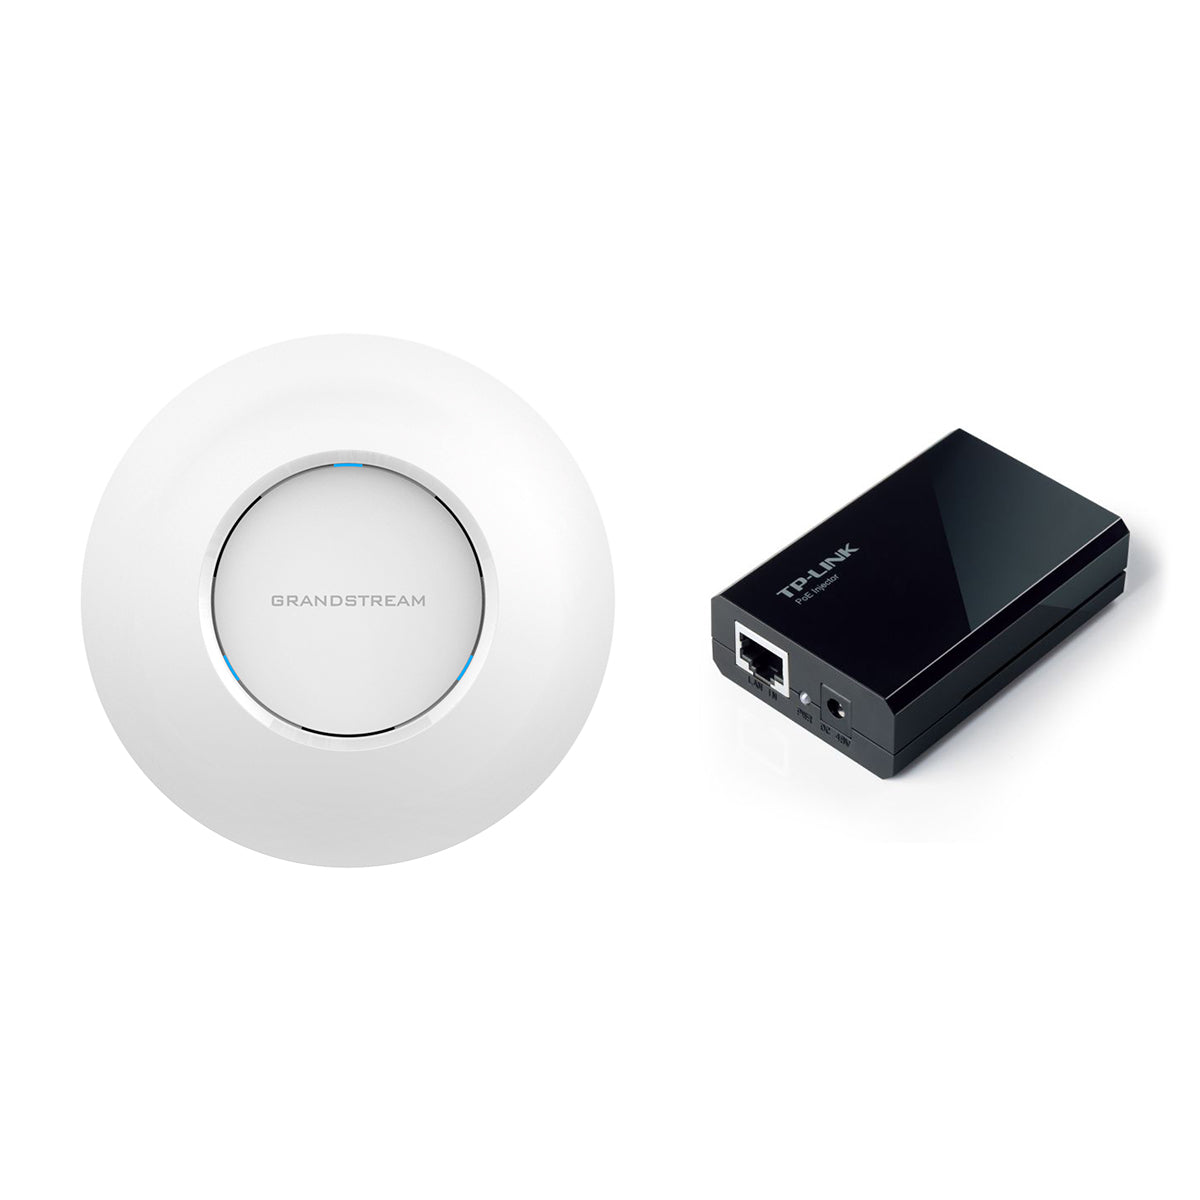 GWN7605 (con Inyector Poe) Ap 802.11ac Mimo 2x2, Dualband